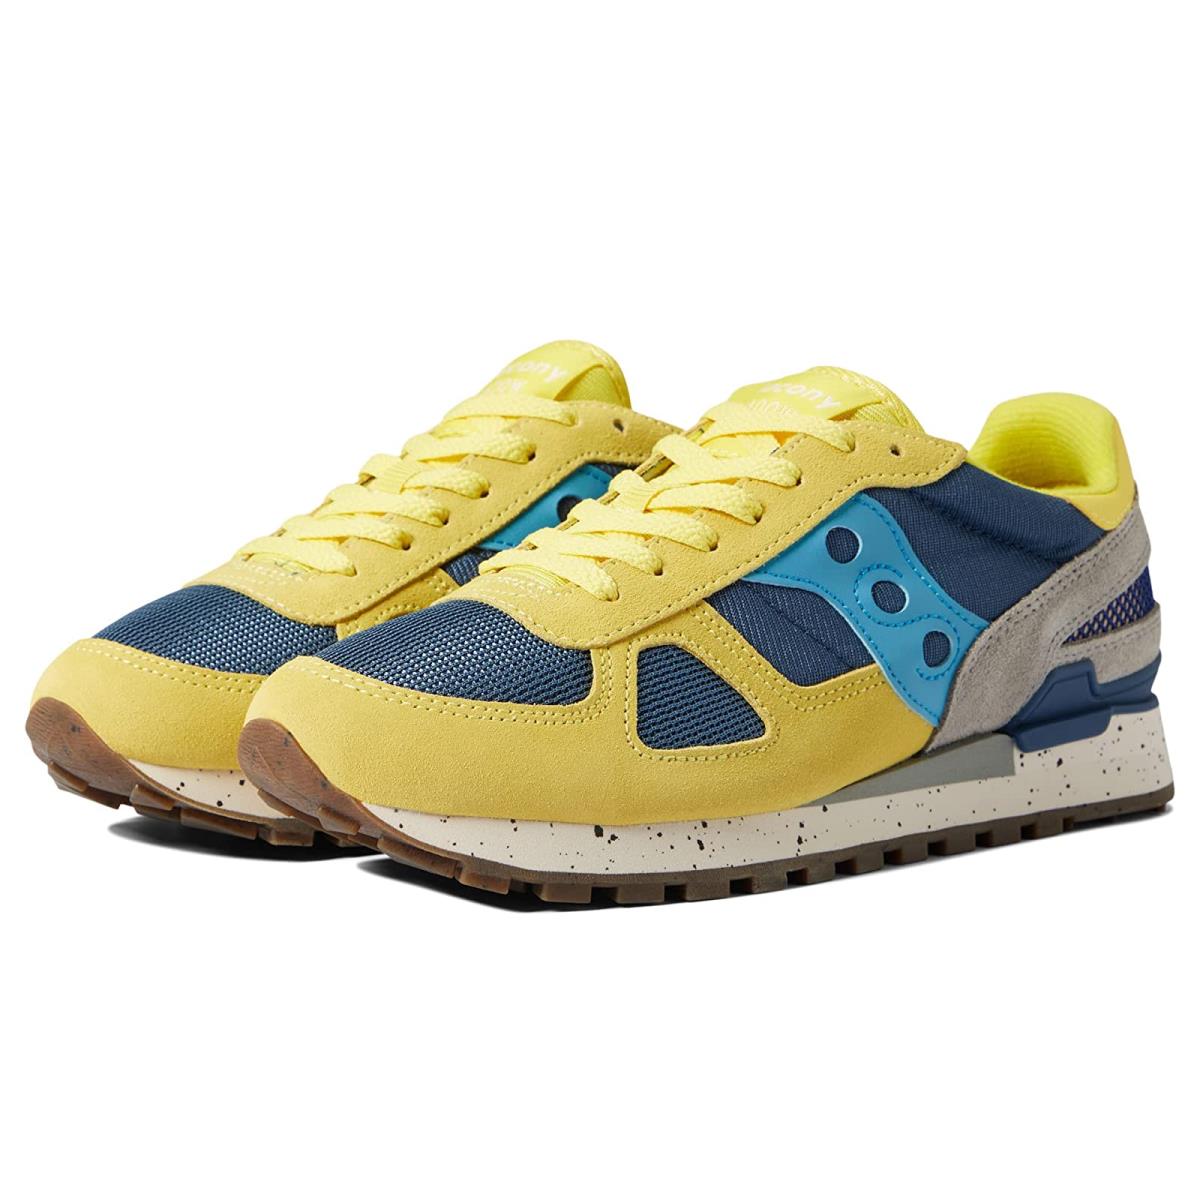 Unisex Sneakers Athletic Shoes Saucony s Shadow Yellow/Navy 3